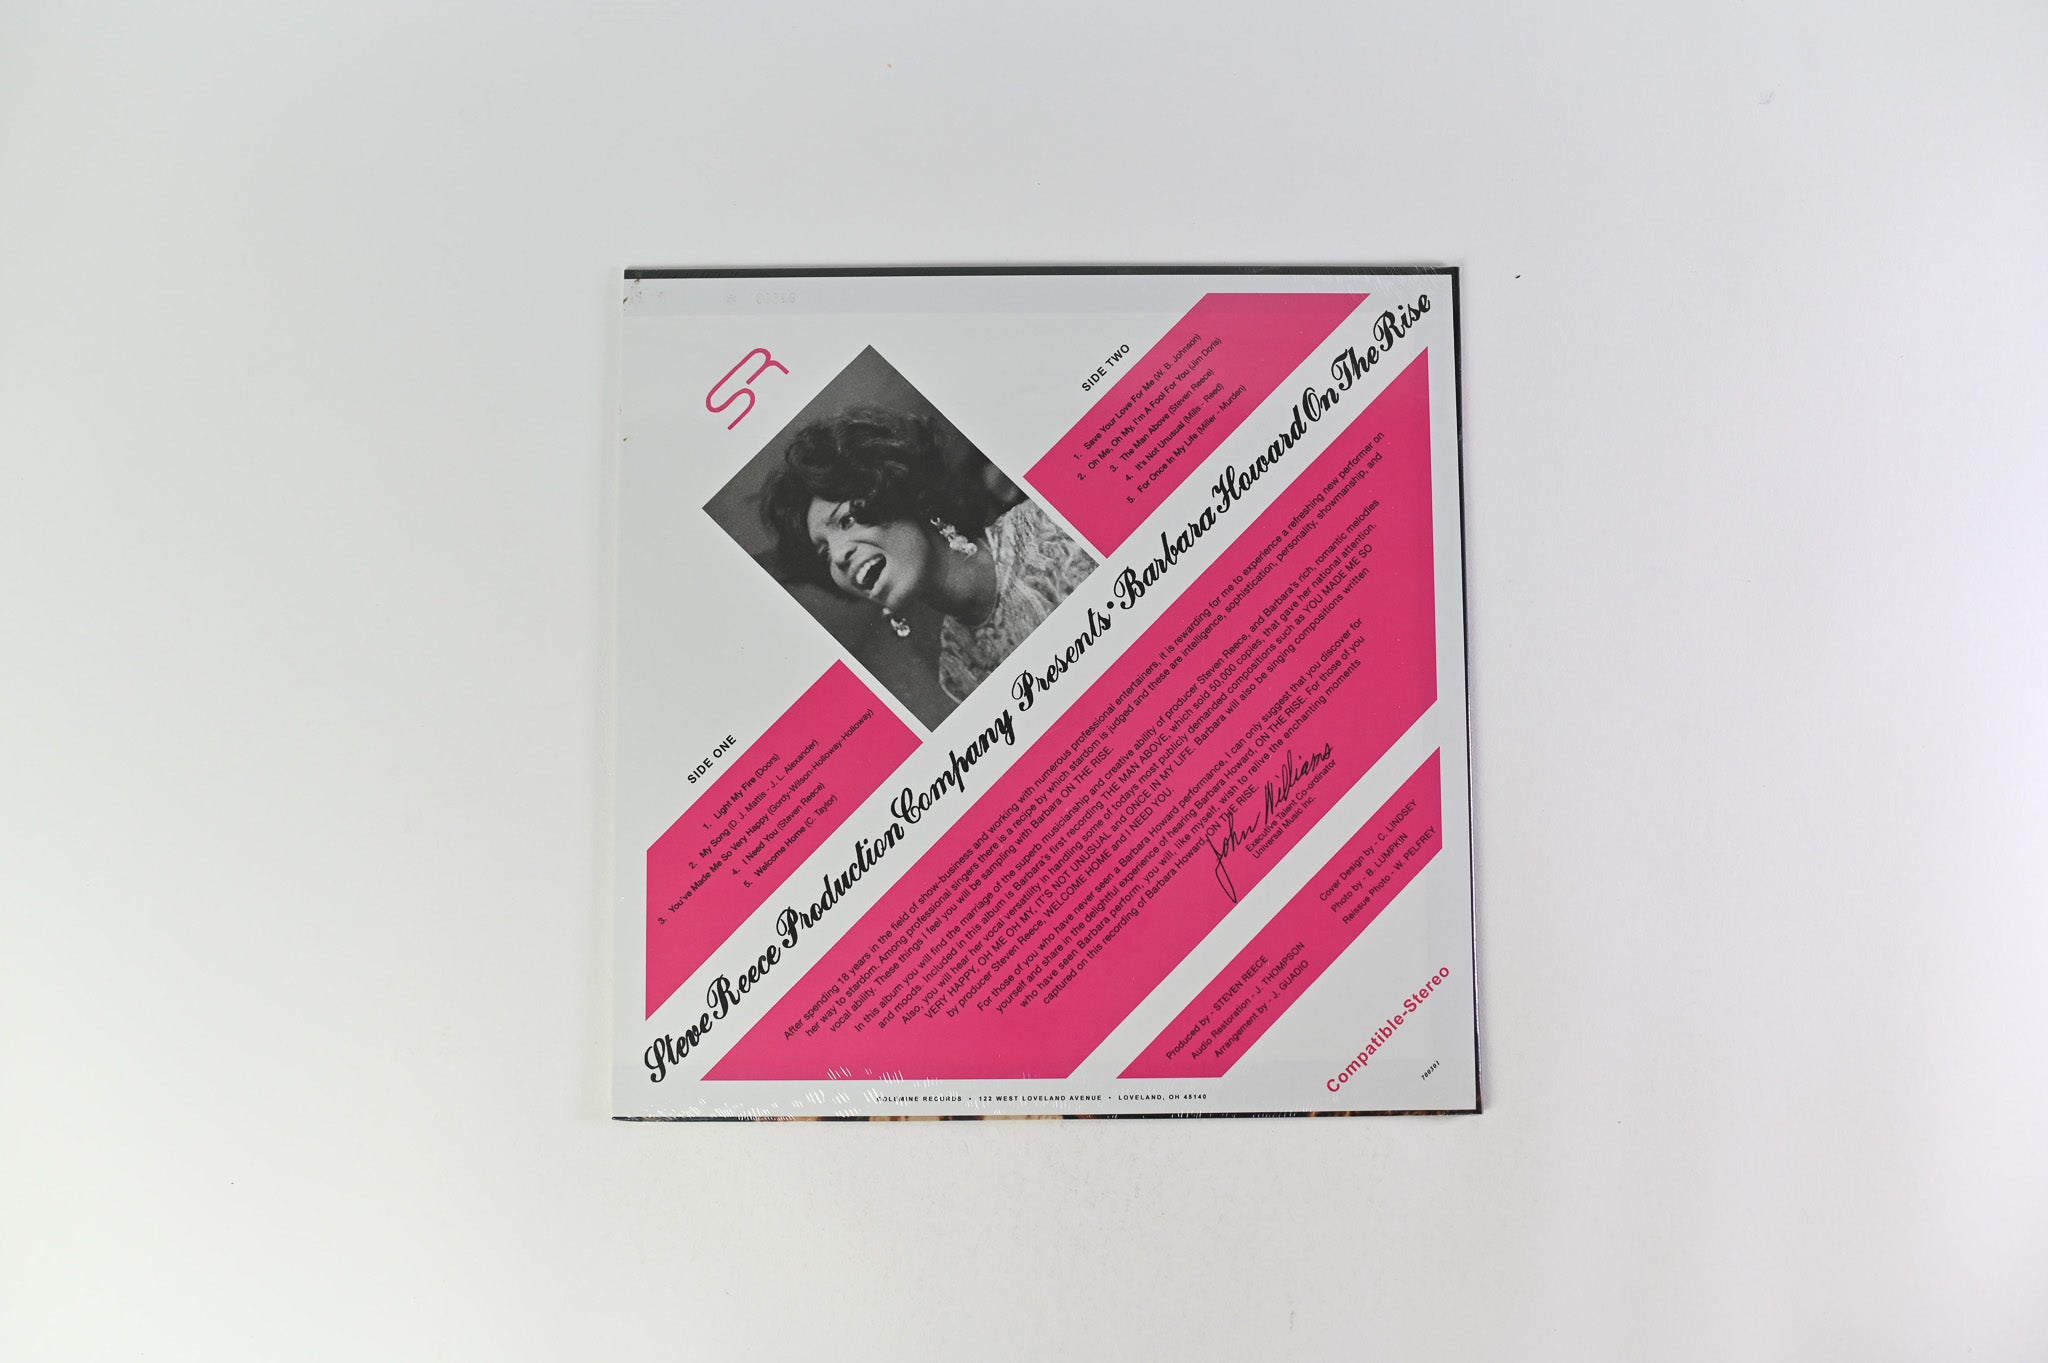 Barbara Howard - On The Rise on Remined Ltd Numbered Pink Vinyl Reissue Sealed